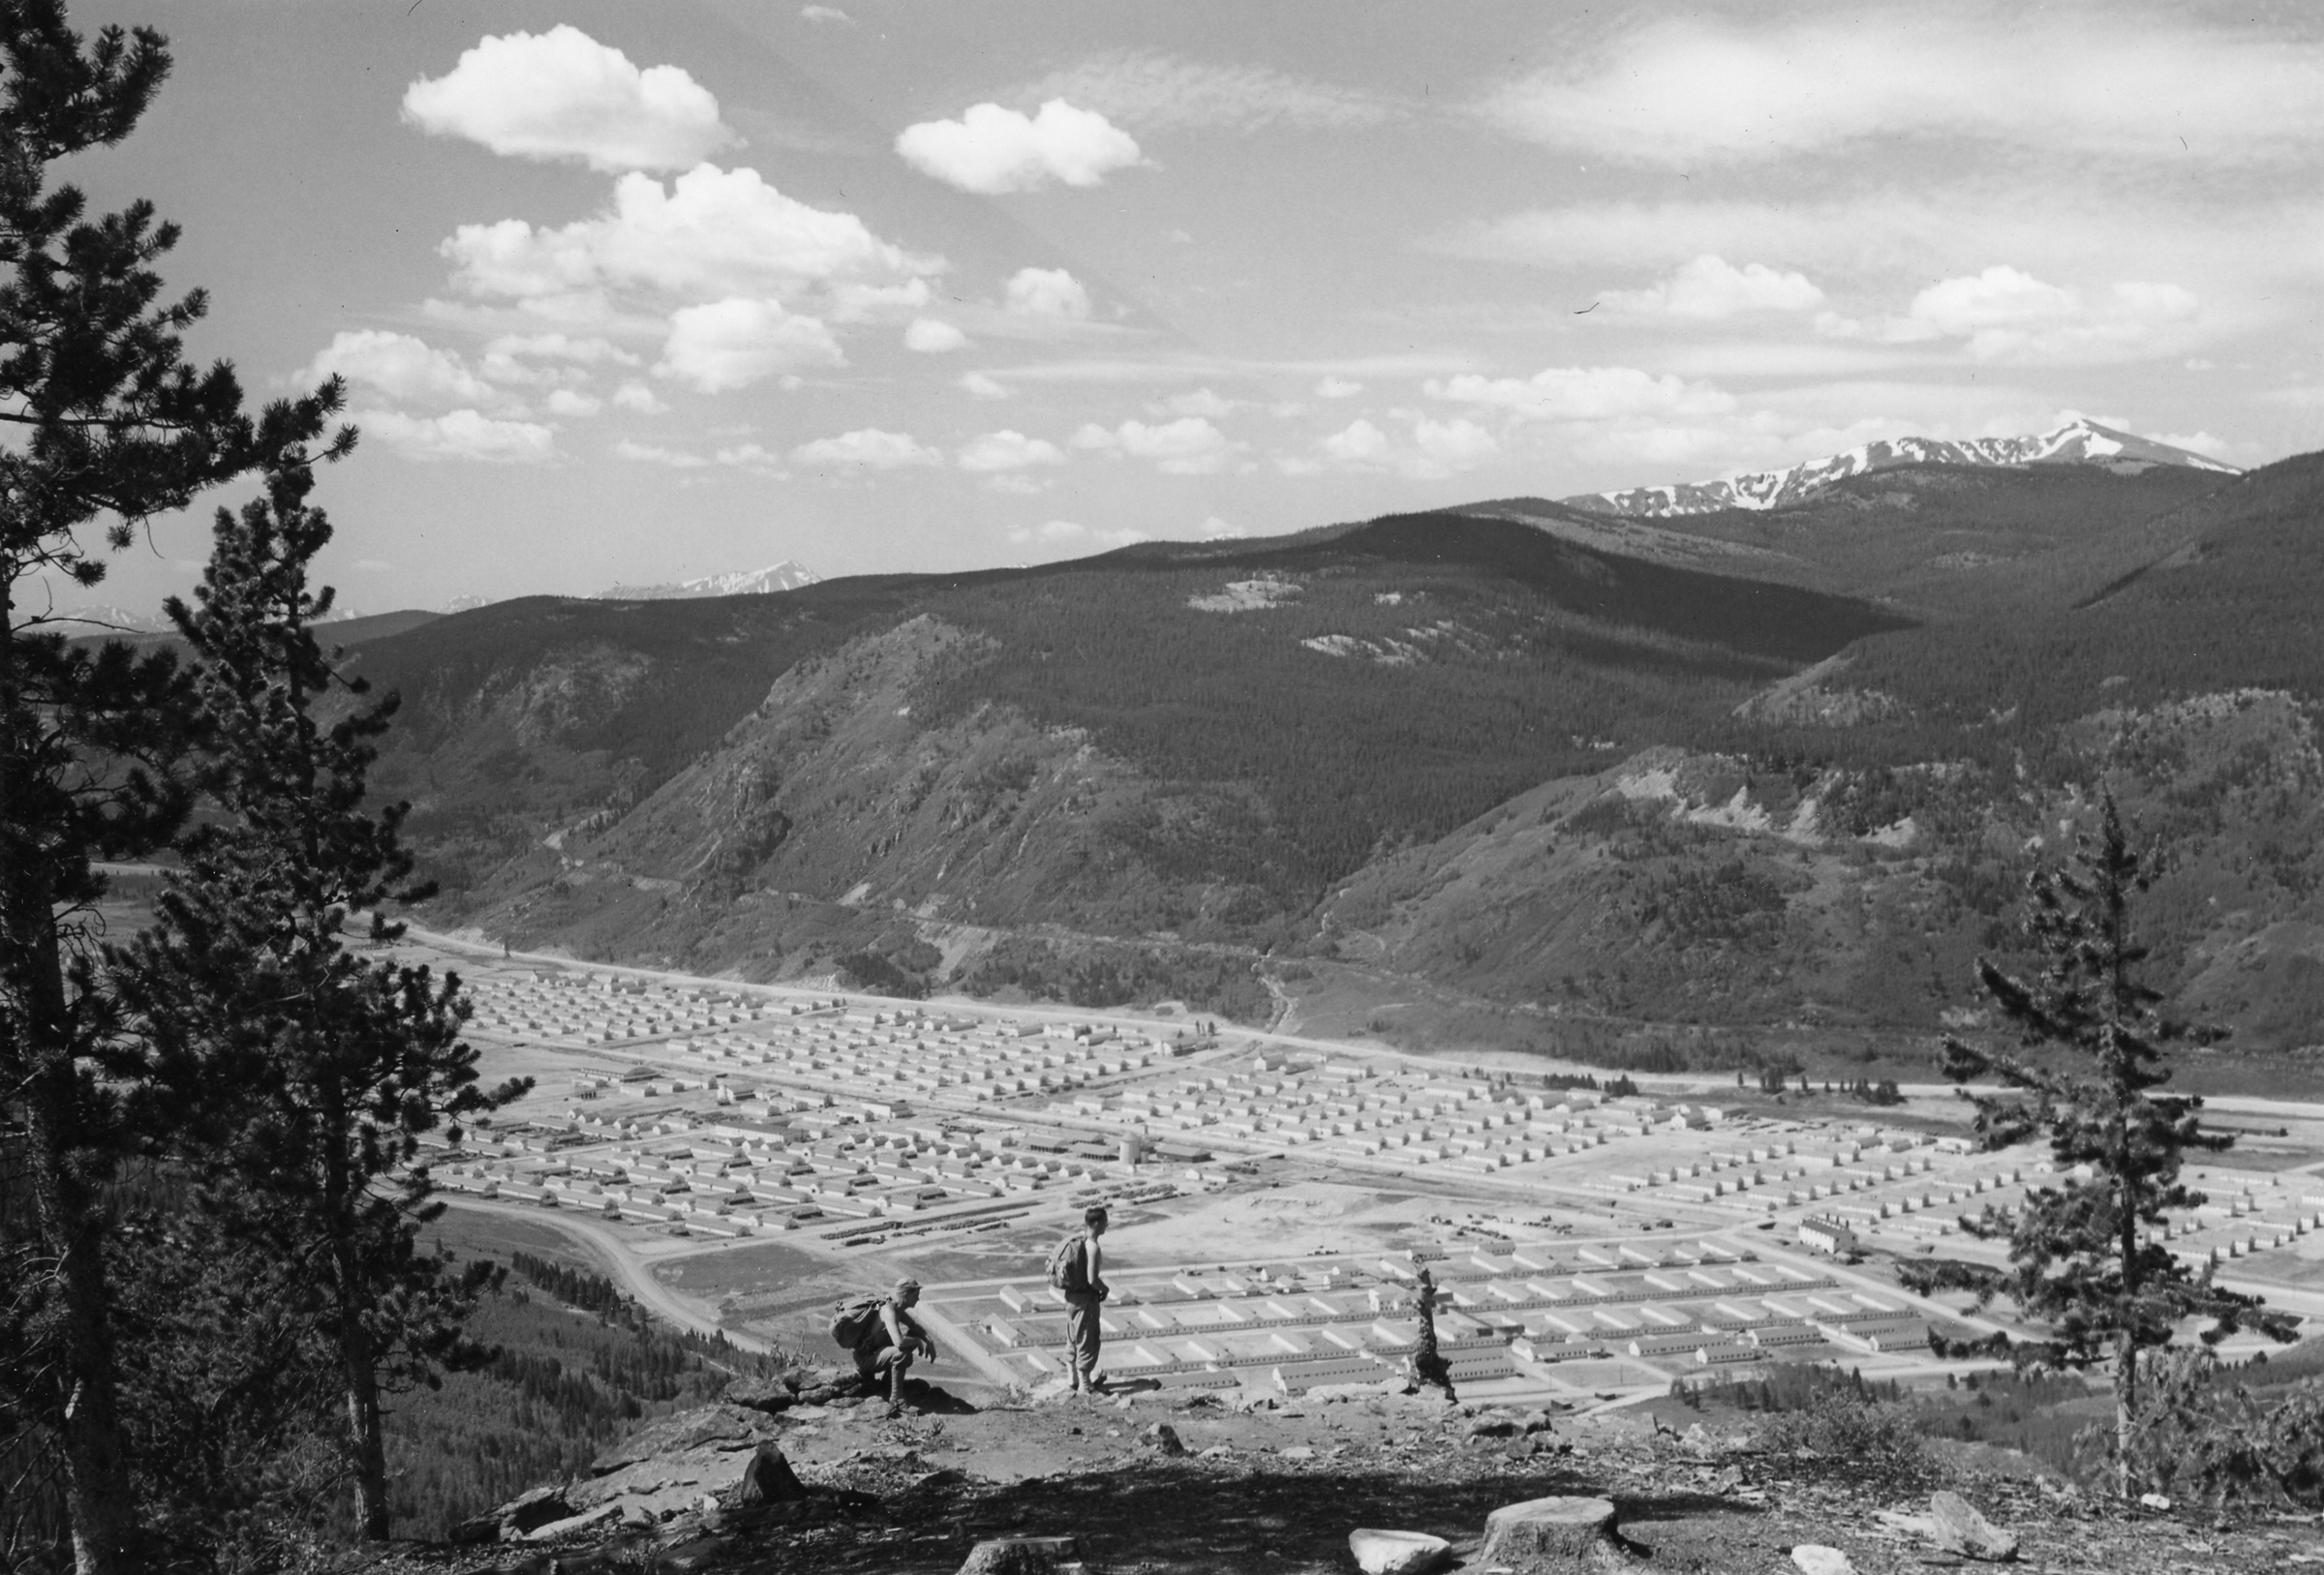 A view of Camp Hale from a nearby mountain, the entire camp visible. A group of men are looking down at the camp from a rise.